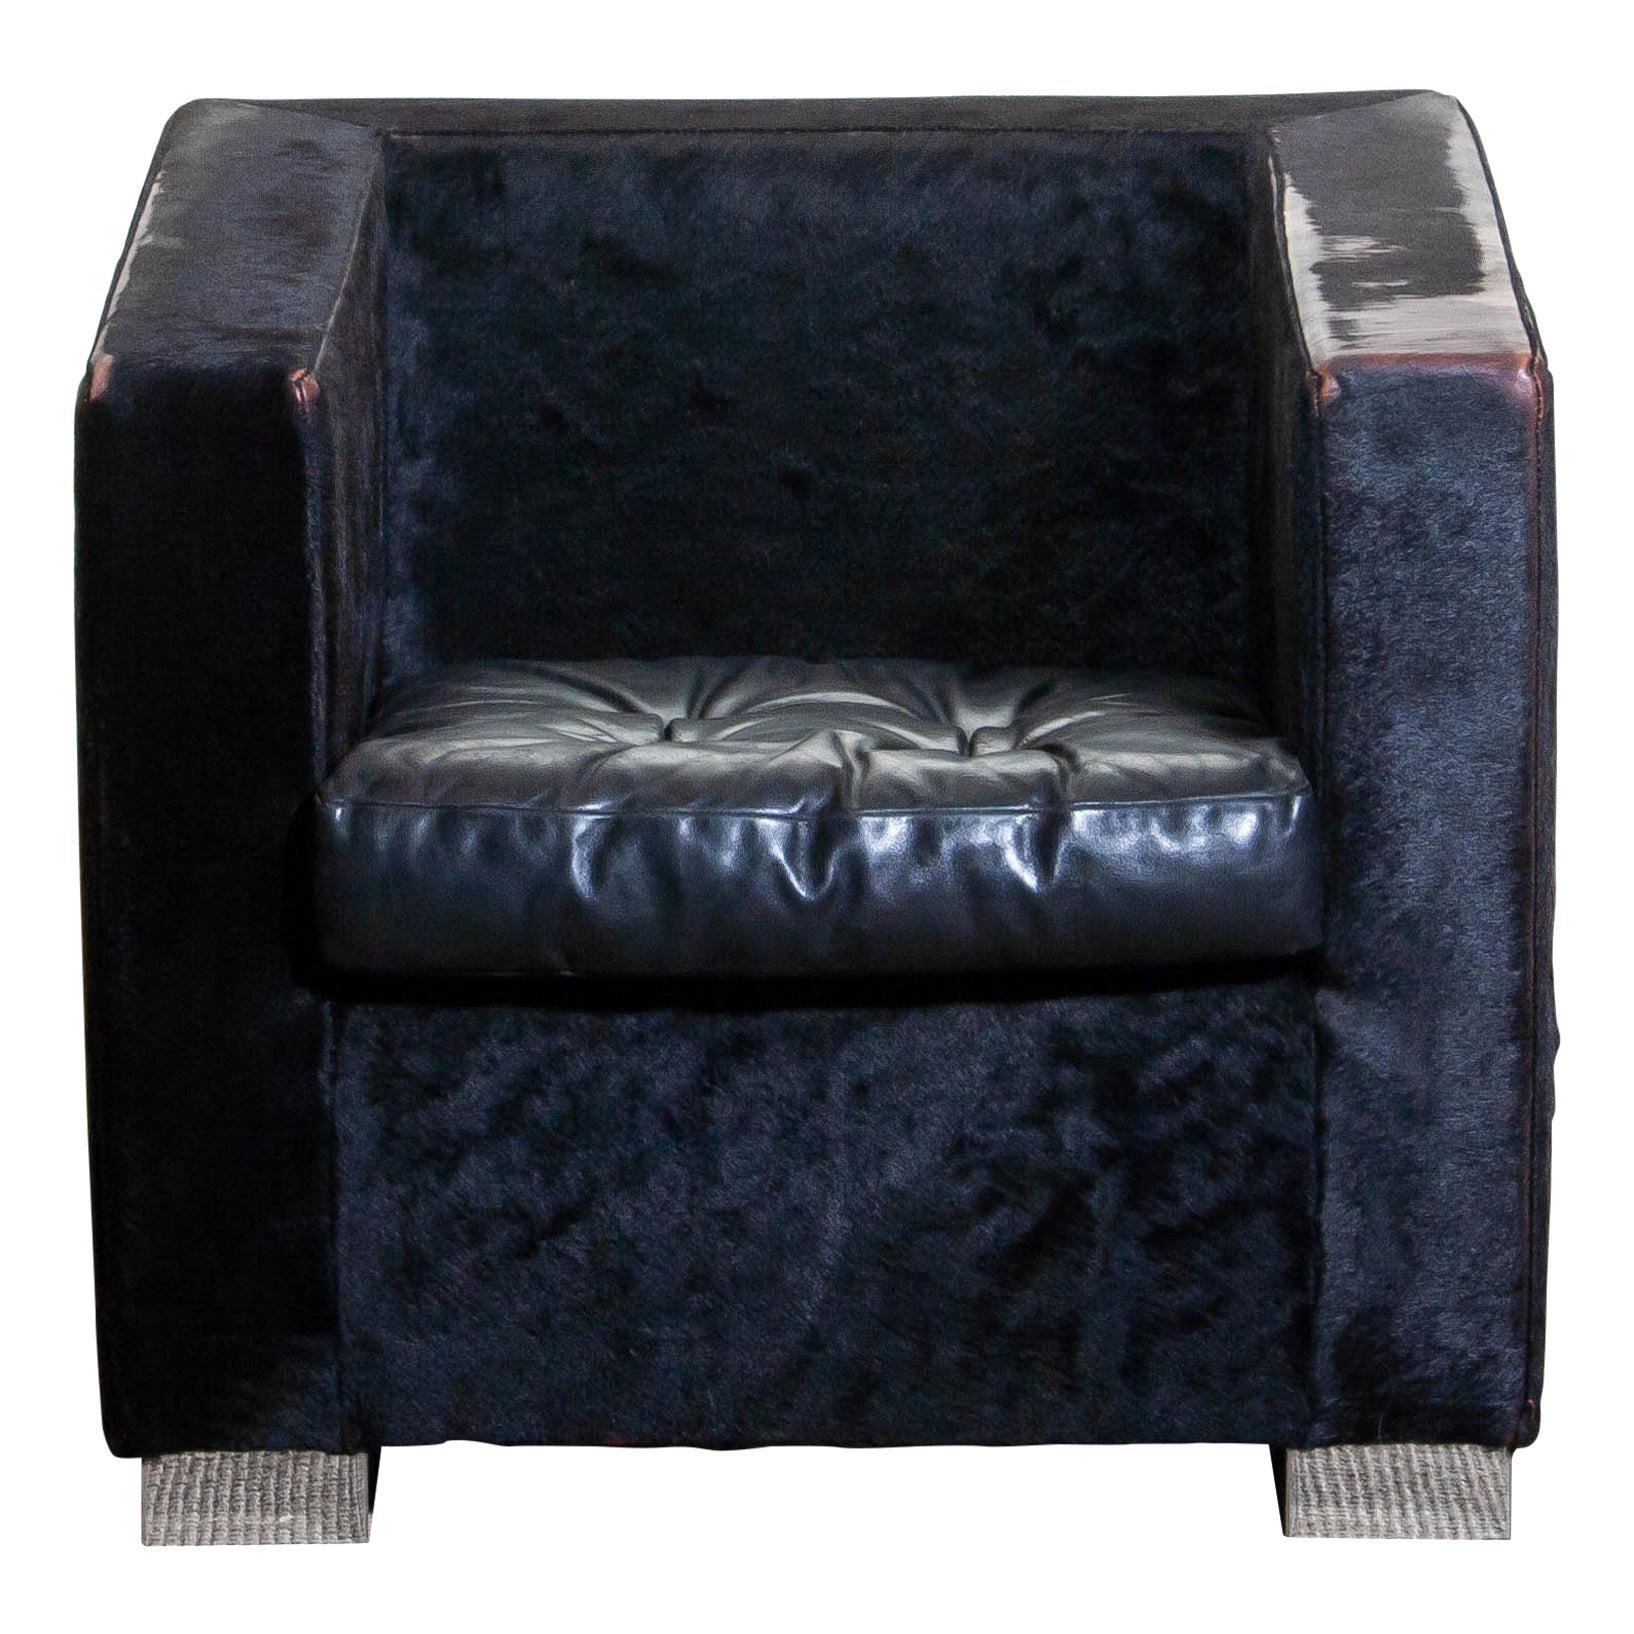 1990, contemporary “Suitcase” armchair designed by Rodolfo Dordoni for Minotti.
Upholstered with black pony and the padded seat cushion, also black, is upholstered with leather.
Standing on squared chromed metal legs.
The overall condition is